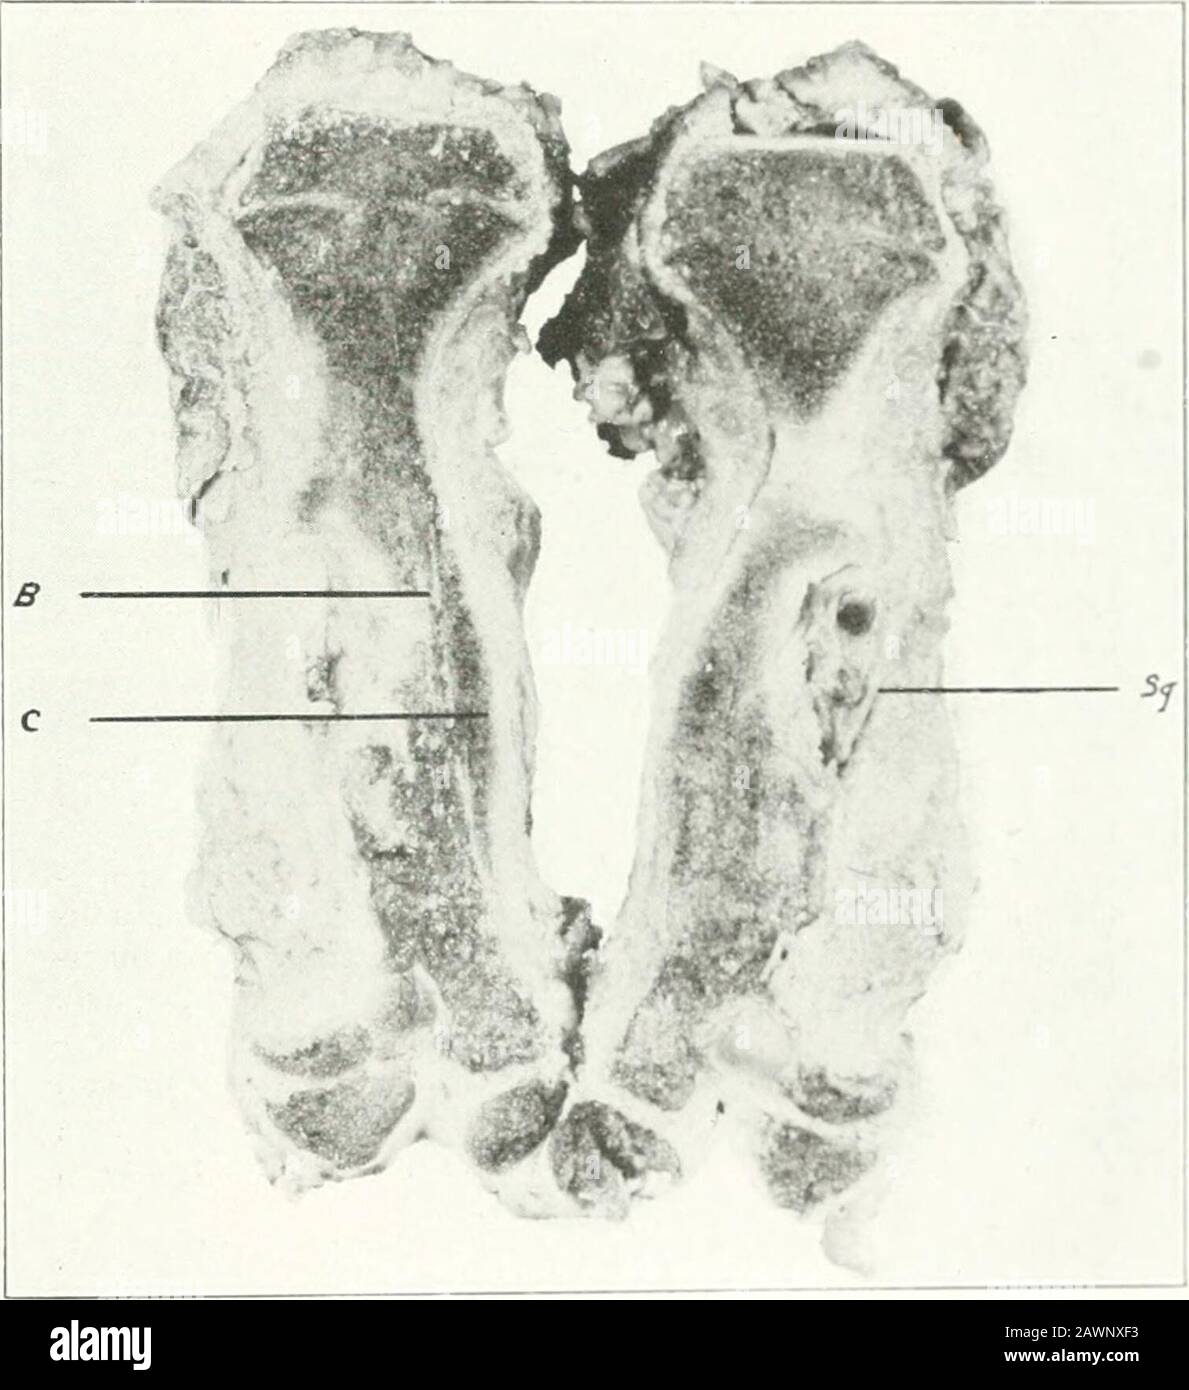 Studies from the laboratories of the Deptof Surgery . Fig. 18.—Osteomyelitis in a dog caused Ijy the injection of Stafhylo-coceut aureut in the medullary canal: .Sl;., cortical sequestrum. Markednew bone prorri»Atral bone prolifrration on the opposite side. Figures 18,19, 20 and 21 arc the same case.. Fig. 19.—Cross-section of bone: Sq., sequcslrum; B, rarefied cortex; C. sub-periosteal bone proliferation. 24 earliest relief oi this pressure sluiuUl he aecduiplisliedby exploratory operation and drainage. If pressureis not relieved, it is logical to assume that the throm-bosis of the entire nut Stock Photo